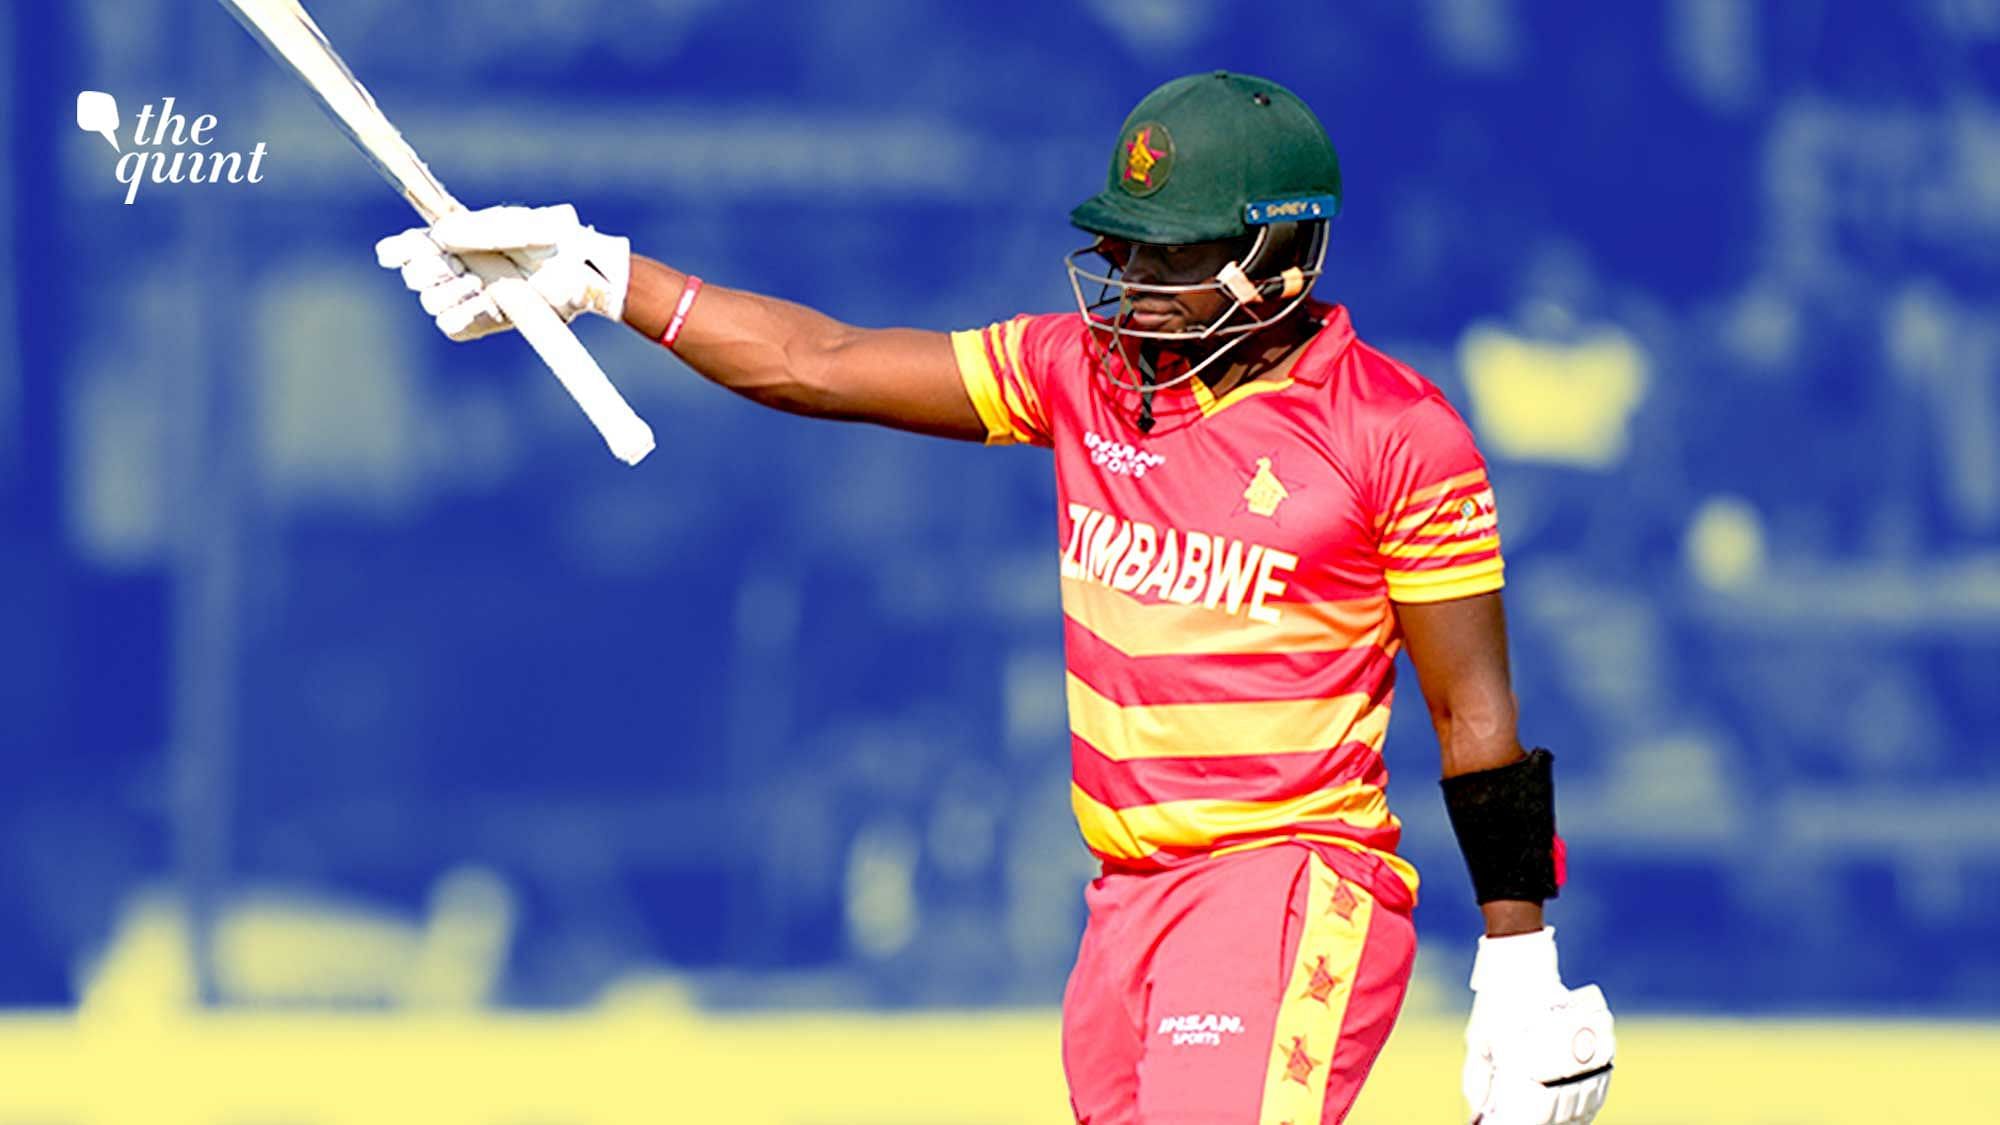 <div class="paragraphs"><p>Zimbabwean batter Innocent Kaia scored a century during his side's 2-1 ODI series win against Bangladesh earlier this month.&nbsp; &nbsp;</p></div>